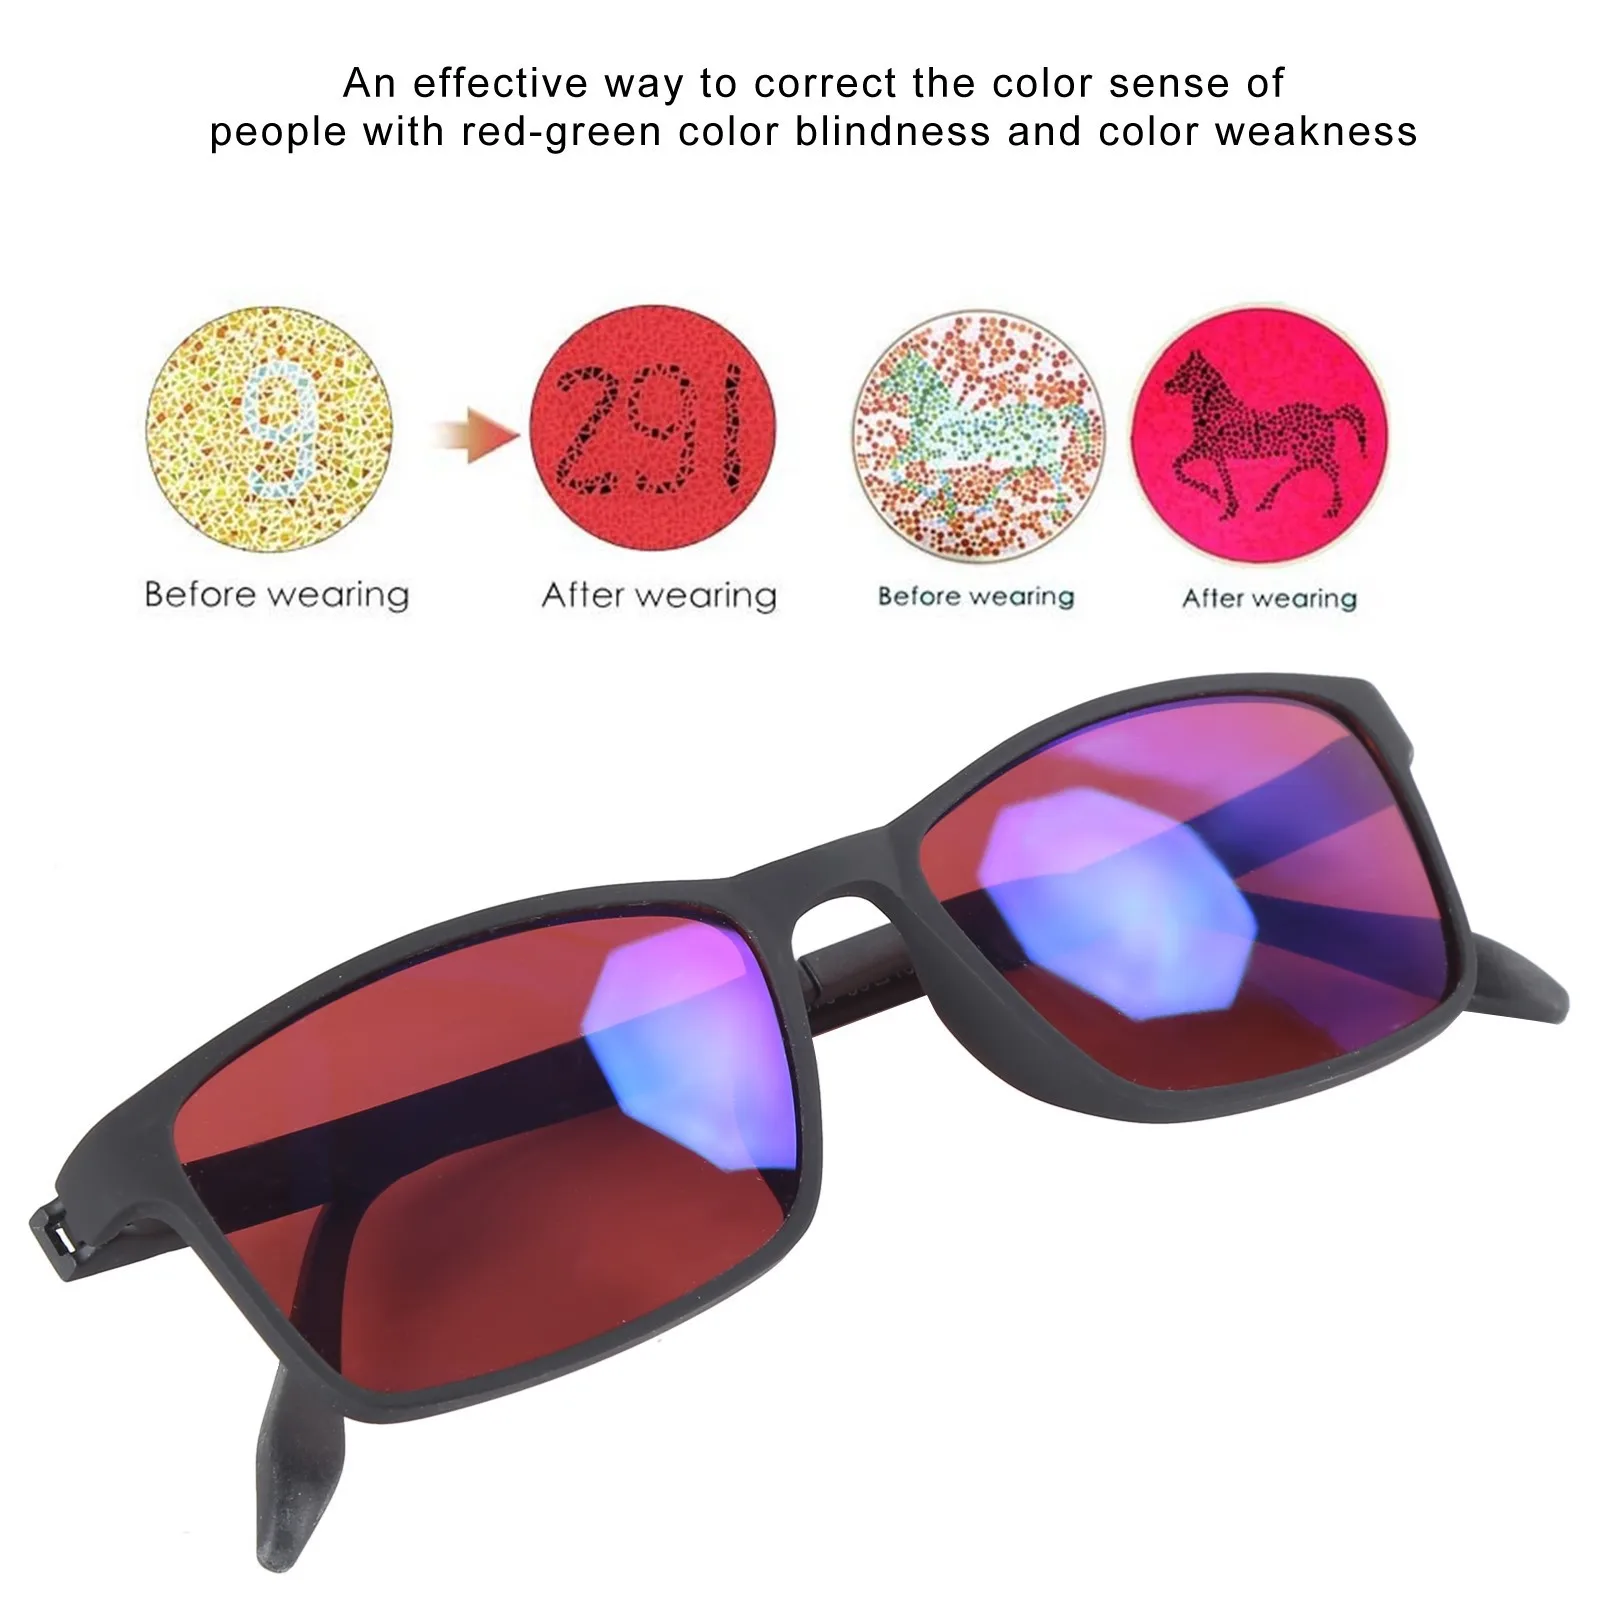 Red Green Men Color-blindness Glasses Drive Printing Dyeing Arts Color Perception Image Recognition Color Blind Lentes Goggles